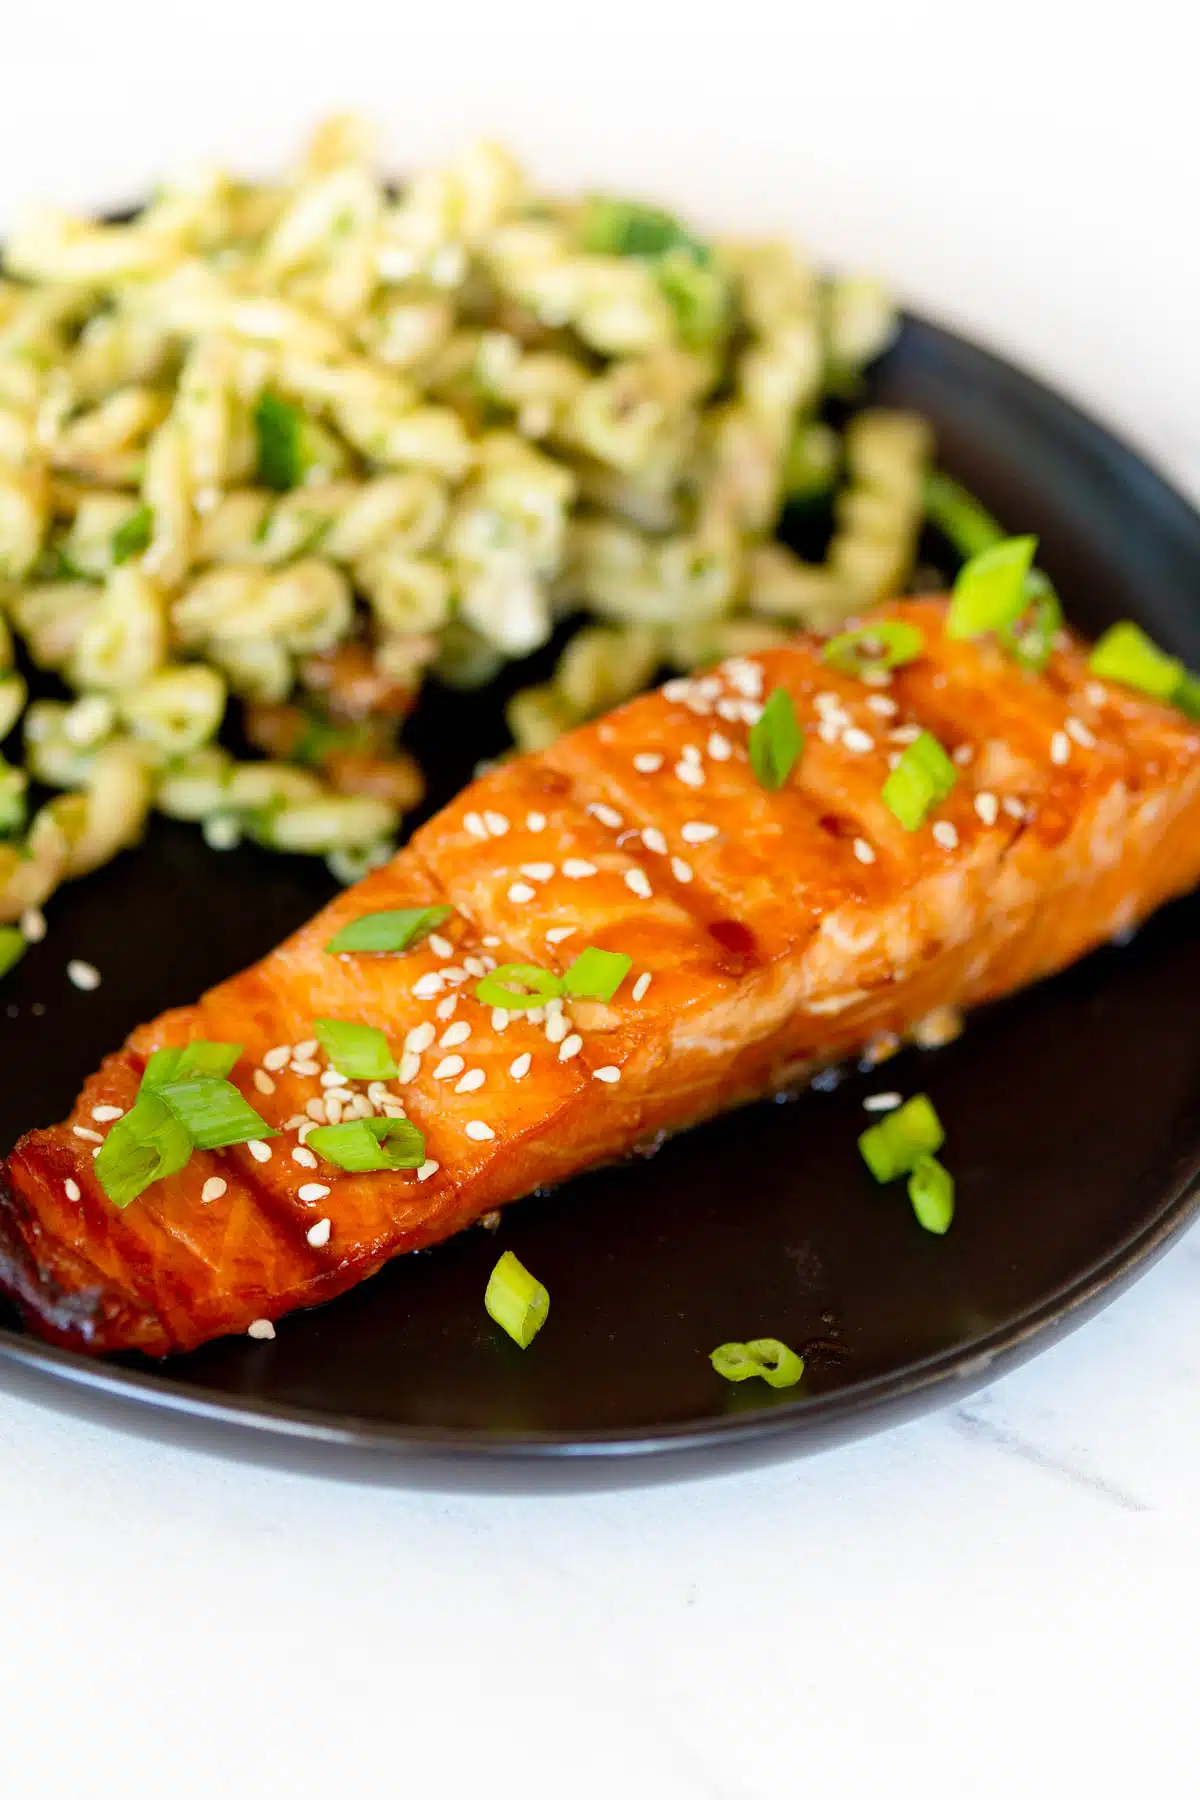 Grilled Teriyaki Salmon garnished with green onions and sesame seeds on a plate with Green Goddess Pasta Salad.